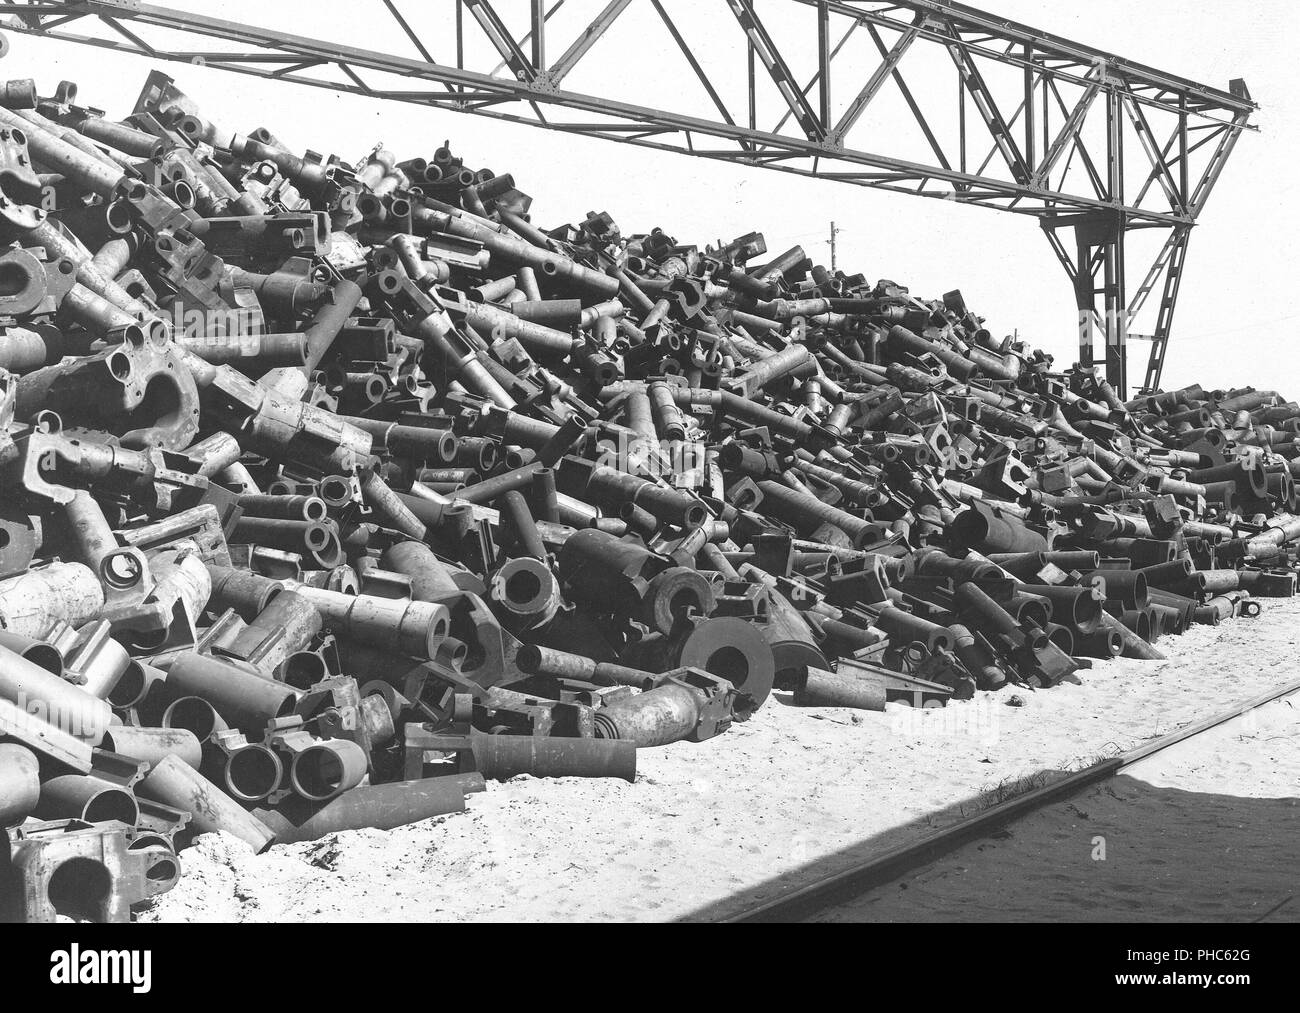 1922 - Army of Occupation - Destruction of cannons Stock Photo